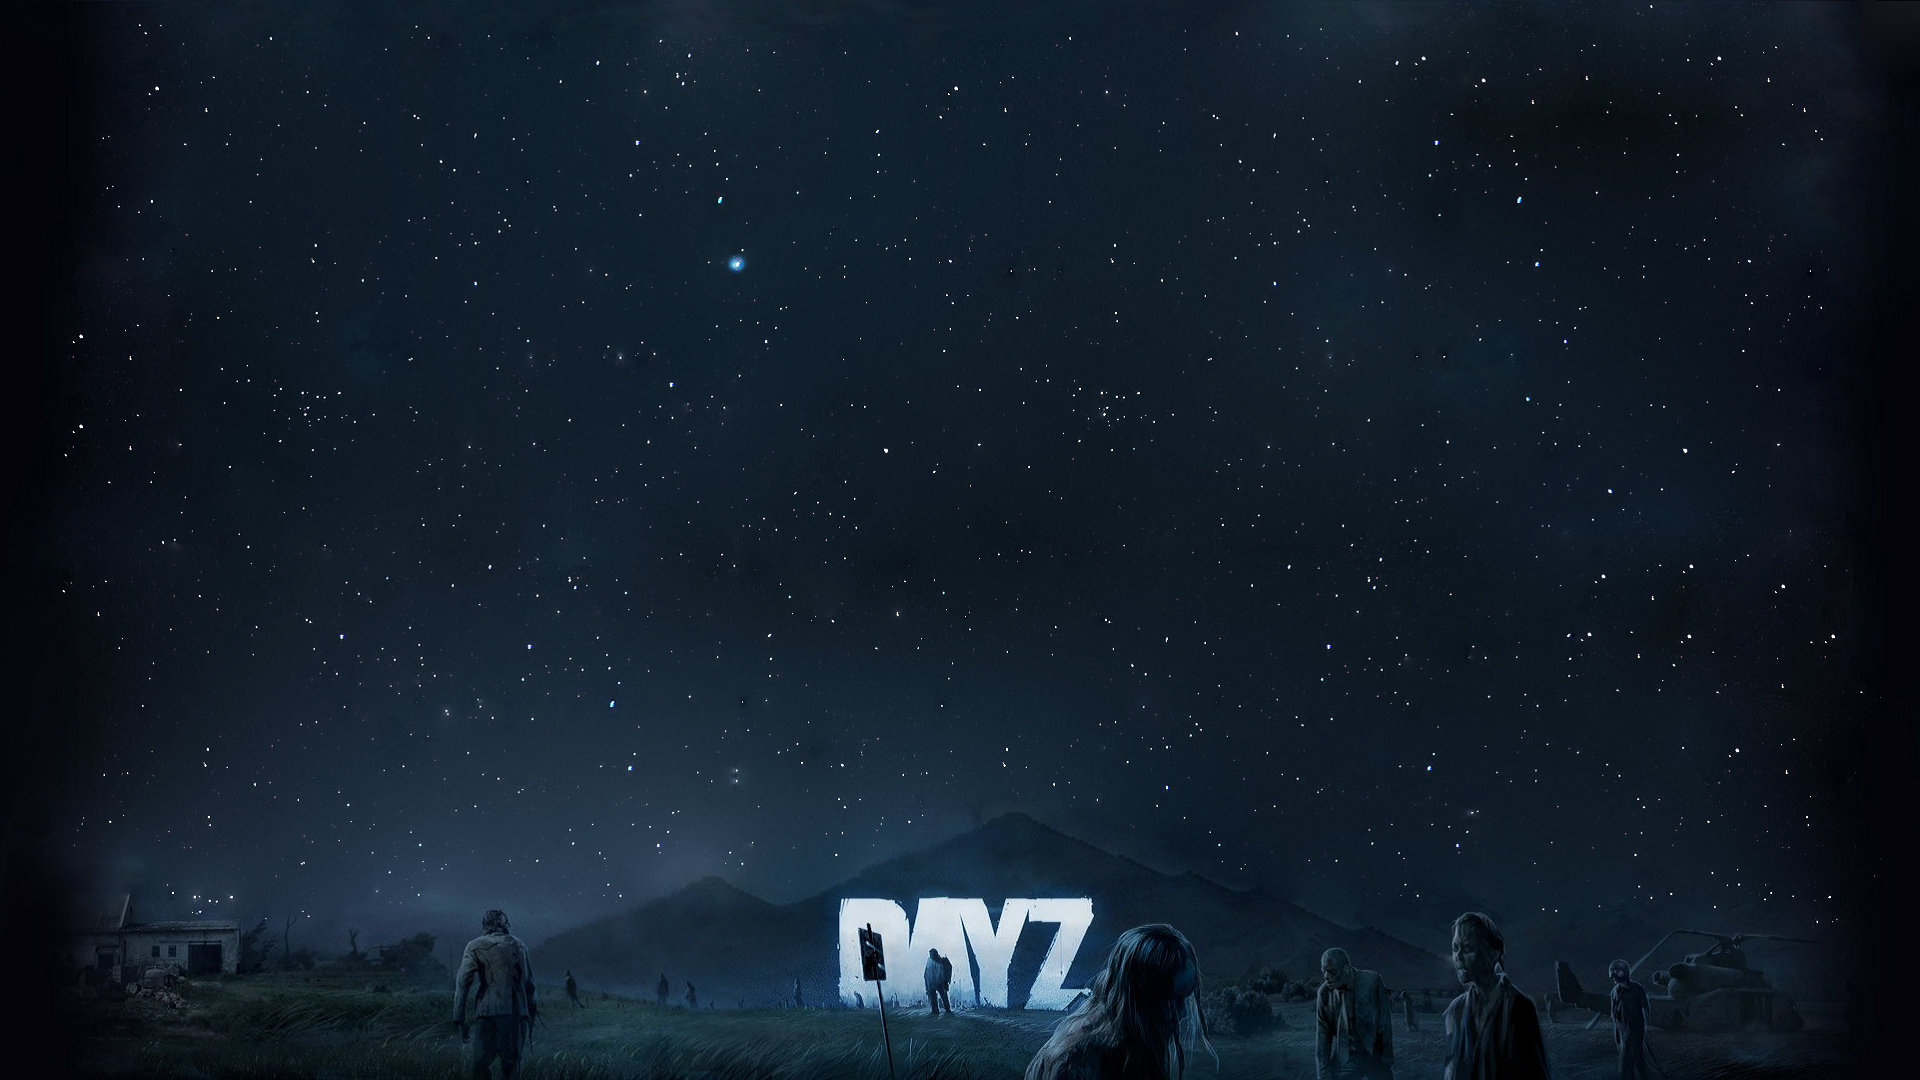 A lot of people wanted a wallpaper version of the banner. Here's my attempt: dayz